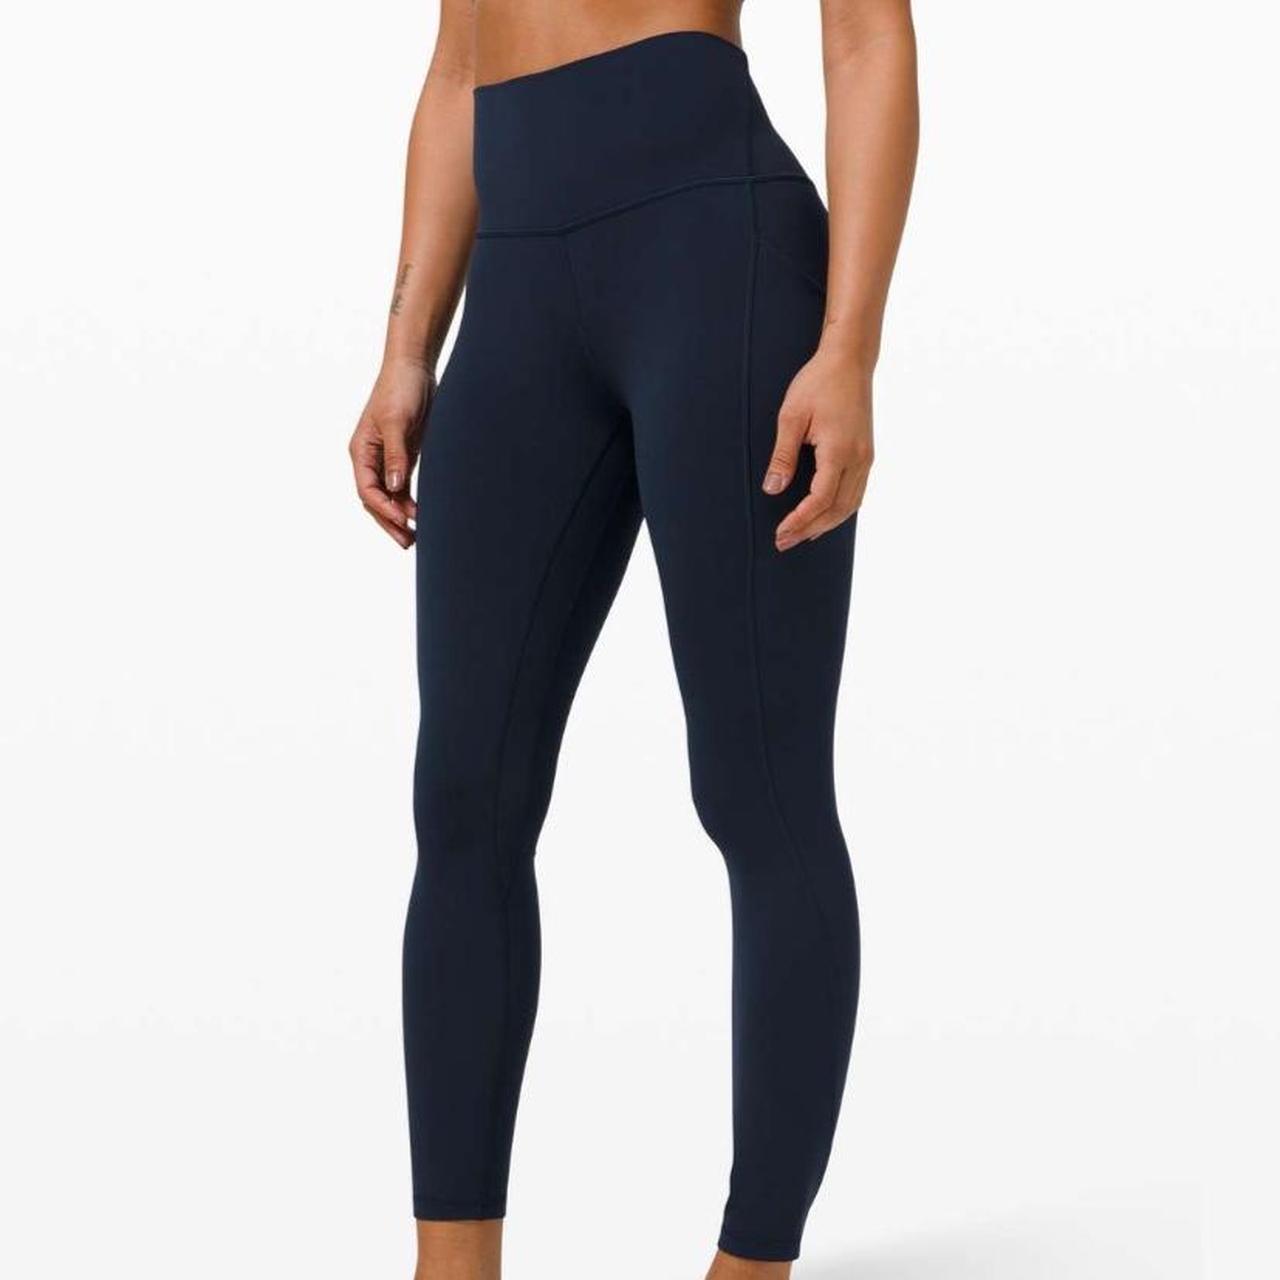 What Color Leggings To Wear With Denim Dress? – solowomen